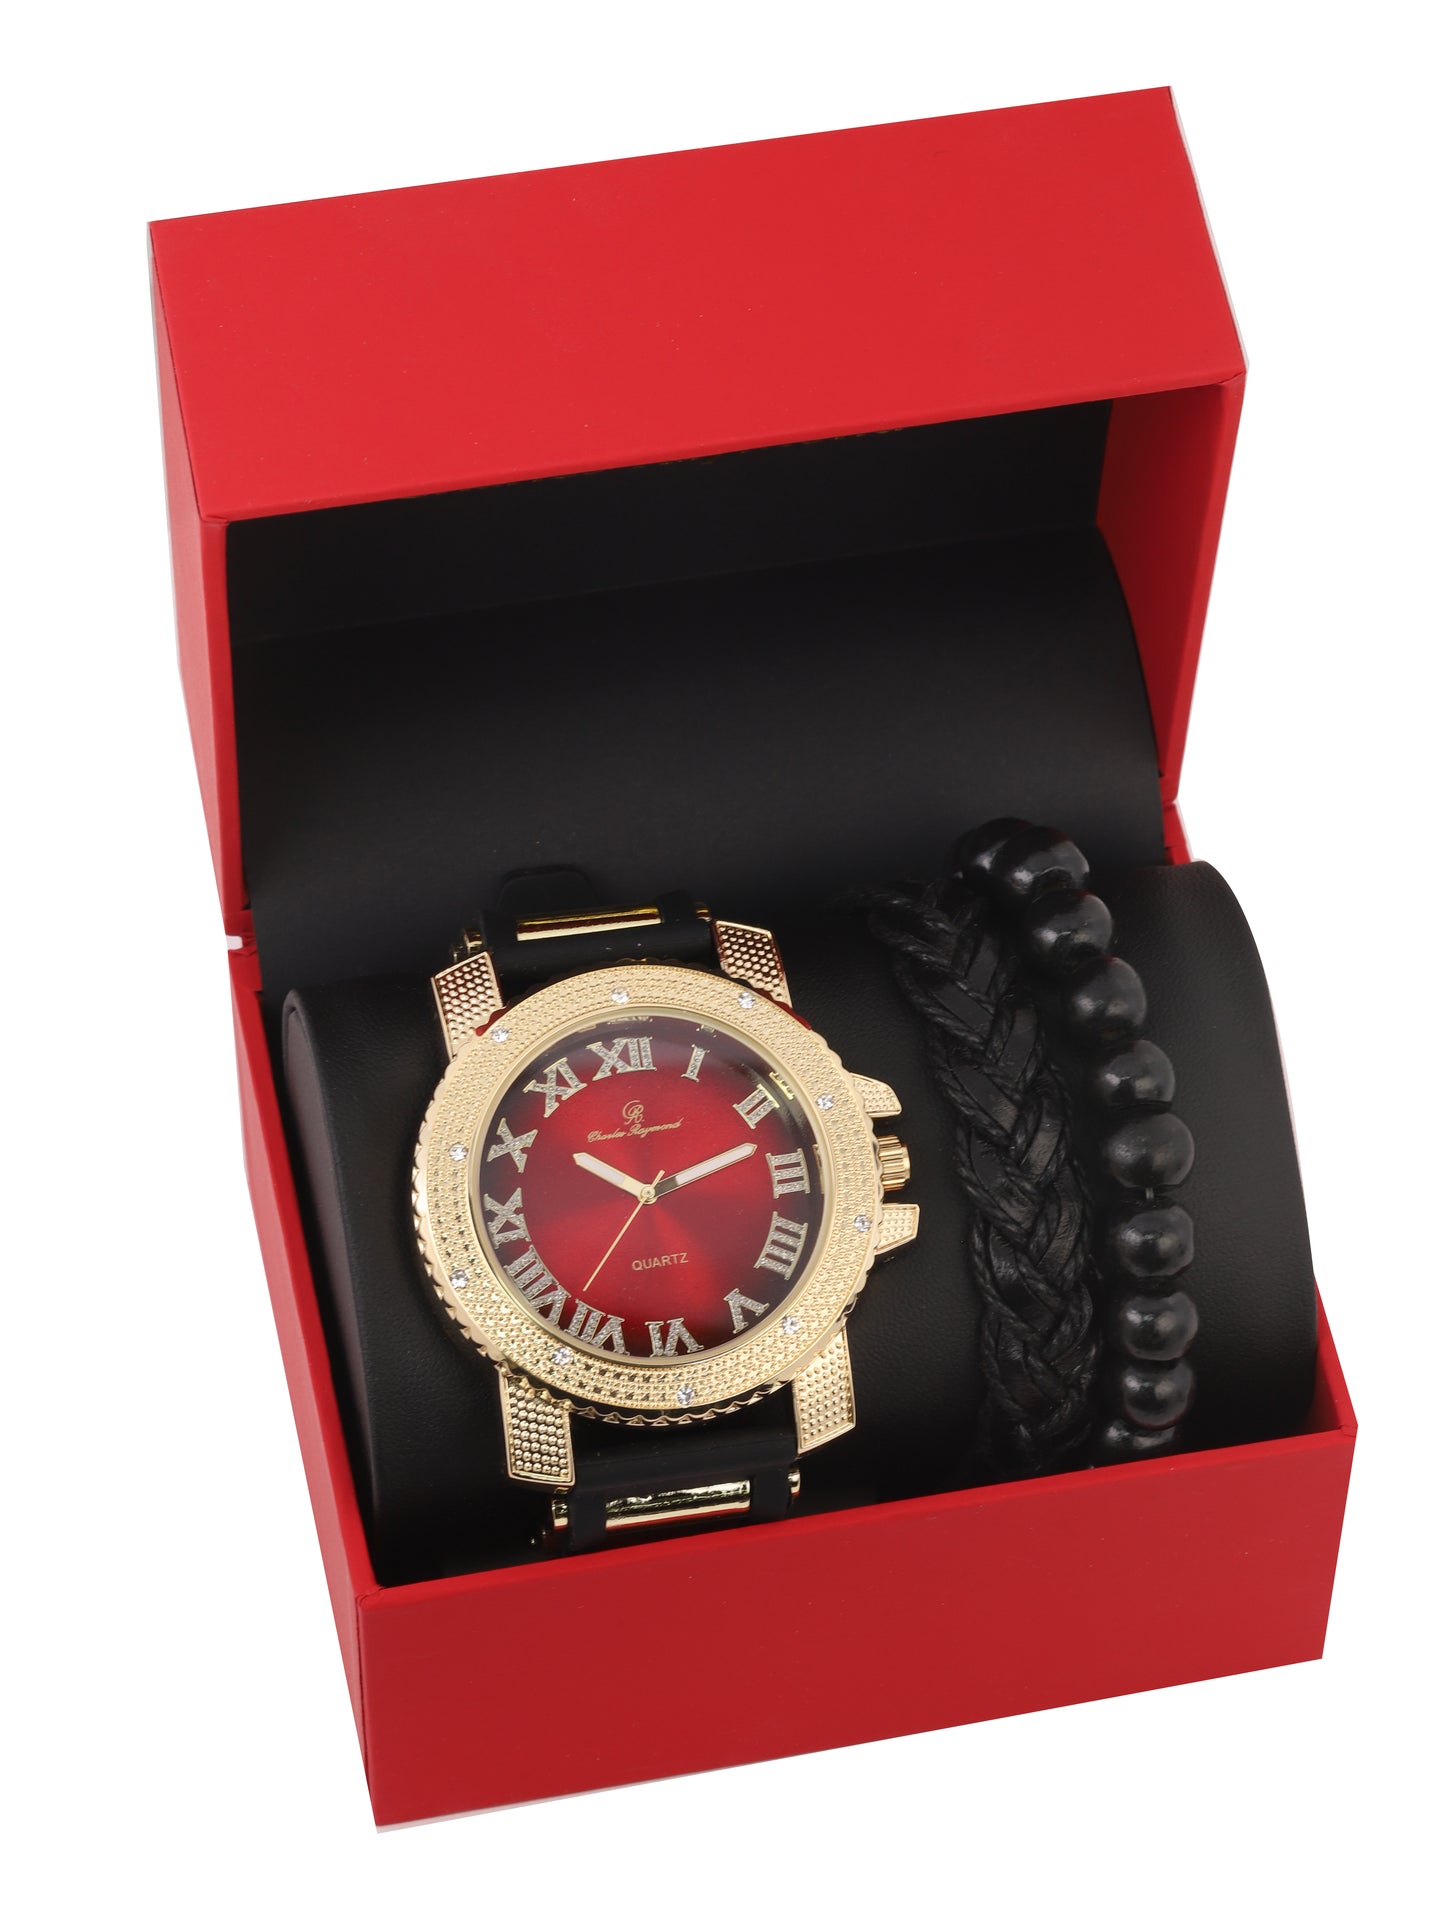 GJM Iced Out Watch with 2 Bracelet Set